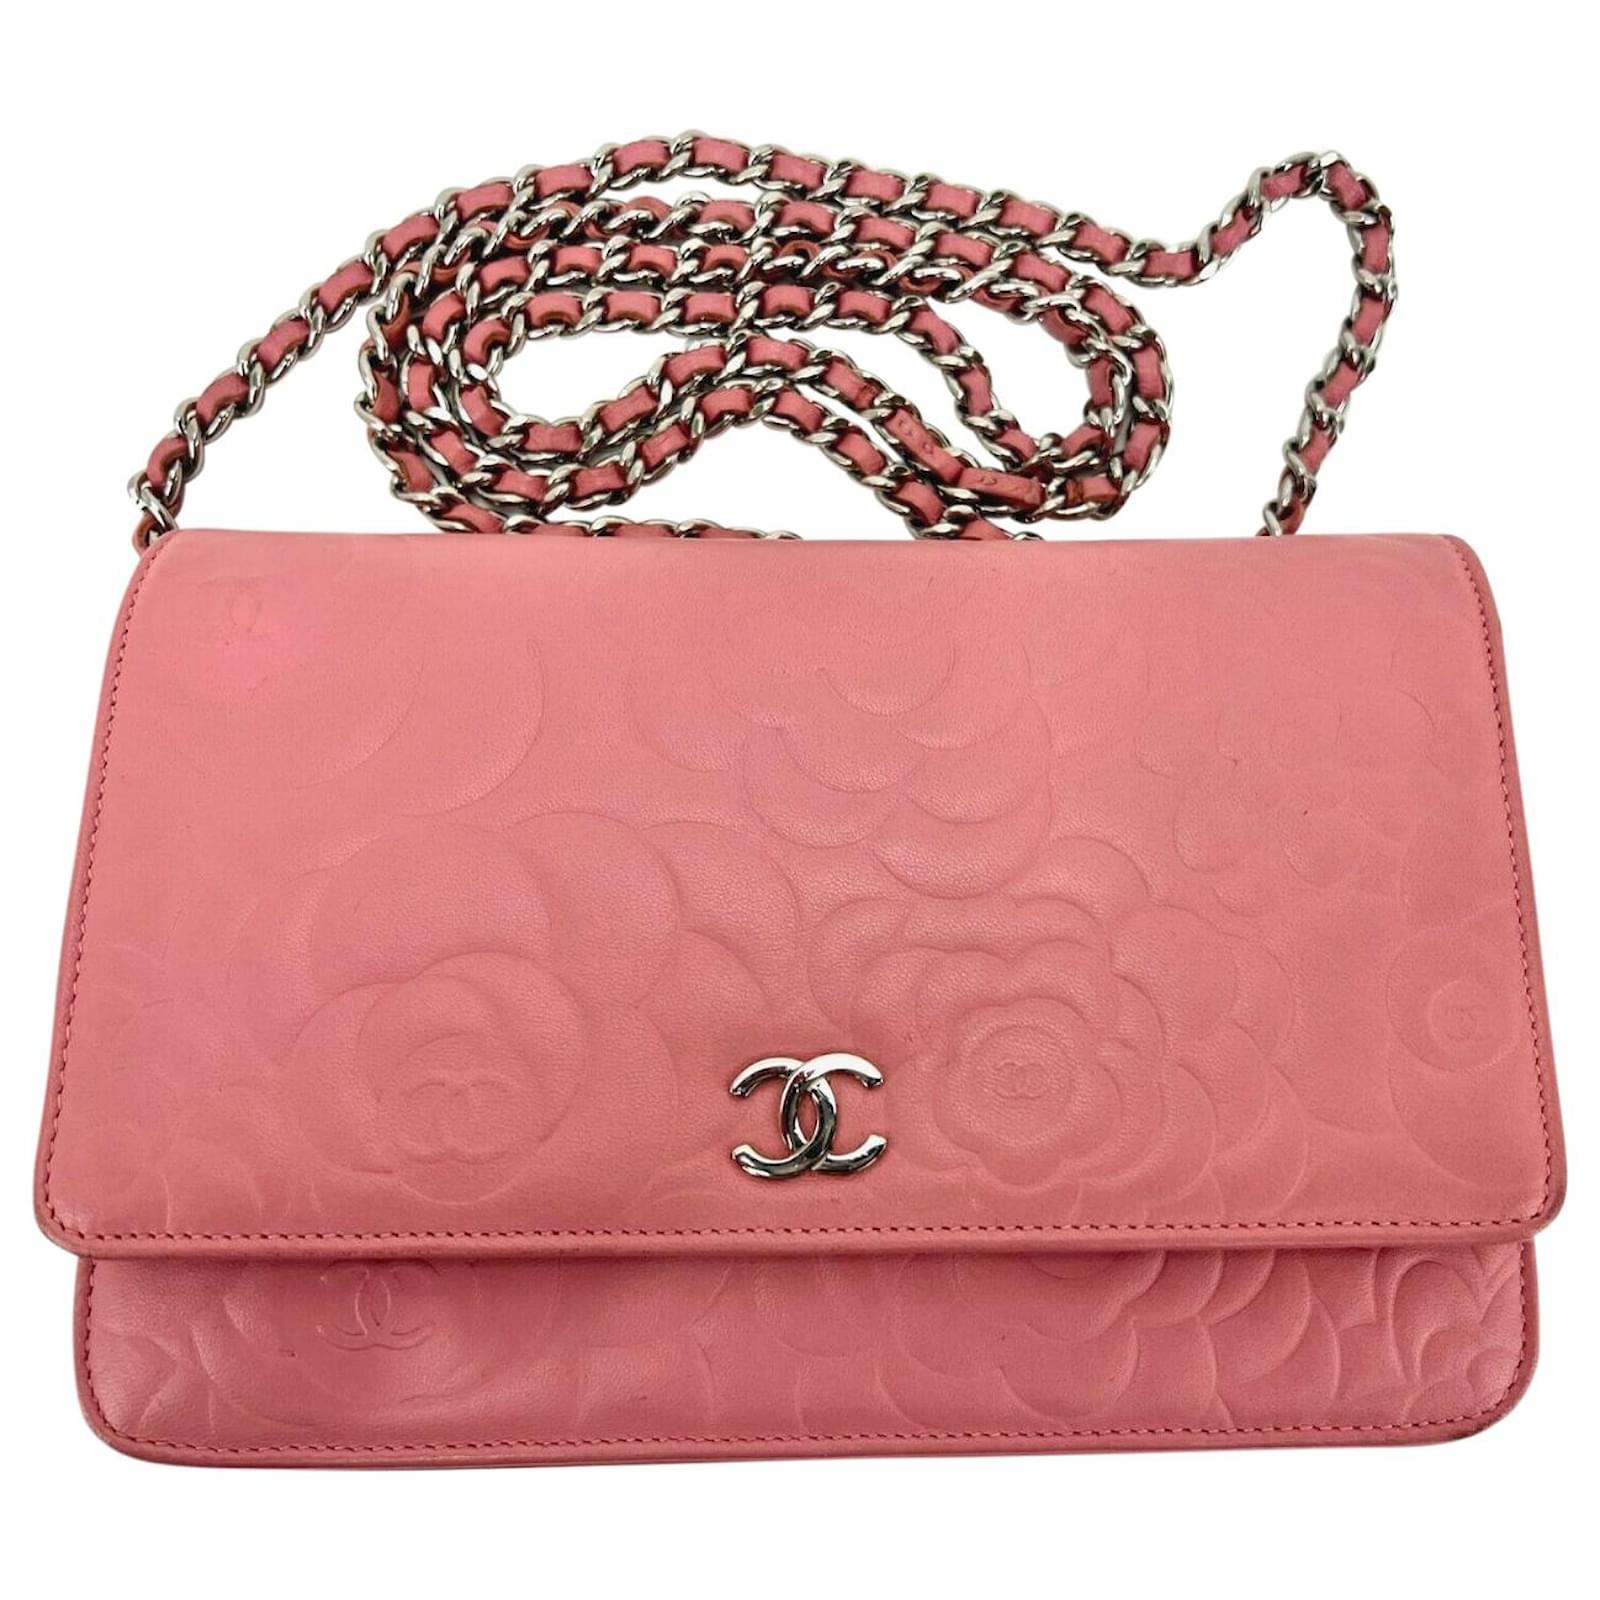 Chanel Clutch Lambskin Camellia Embossed Pink Wallet On A Chain C61  Authentic Leather ref.641472 - Joli Closet